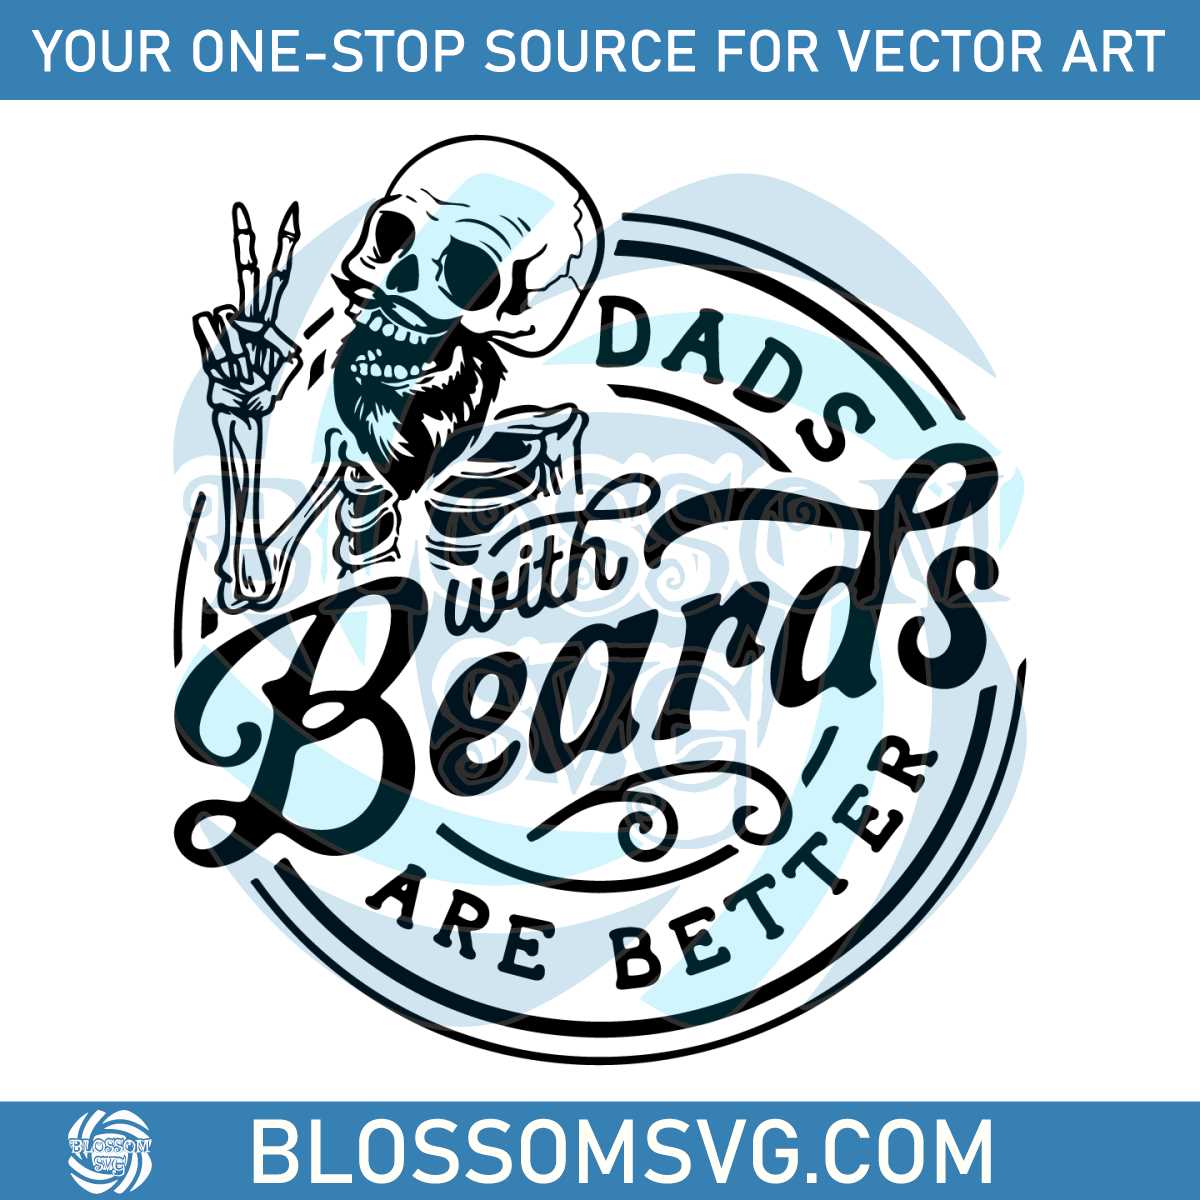 dads-with-beards-are-better-funny-fathers-day-svg-cutting-file